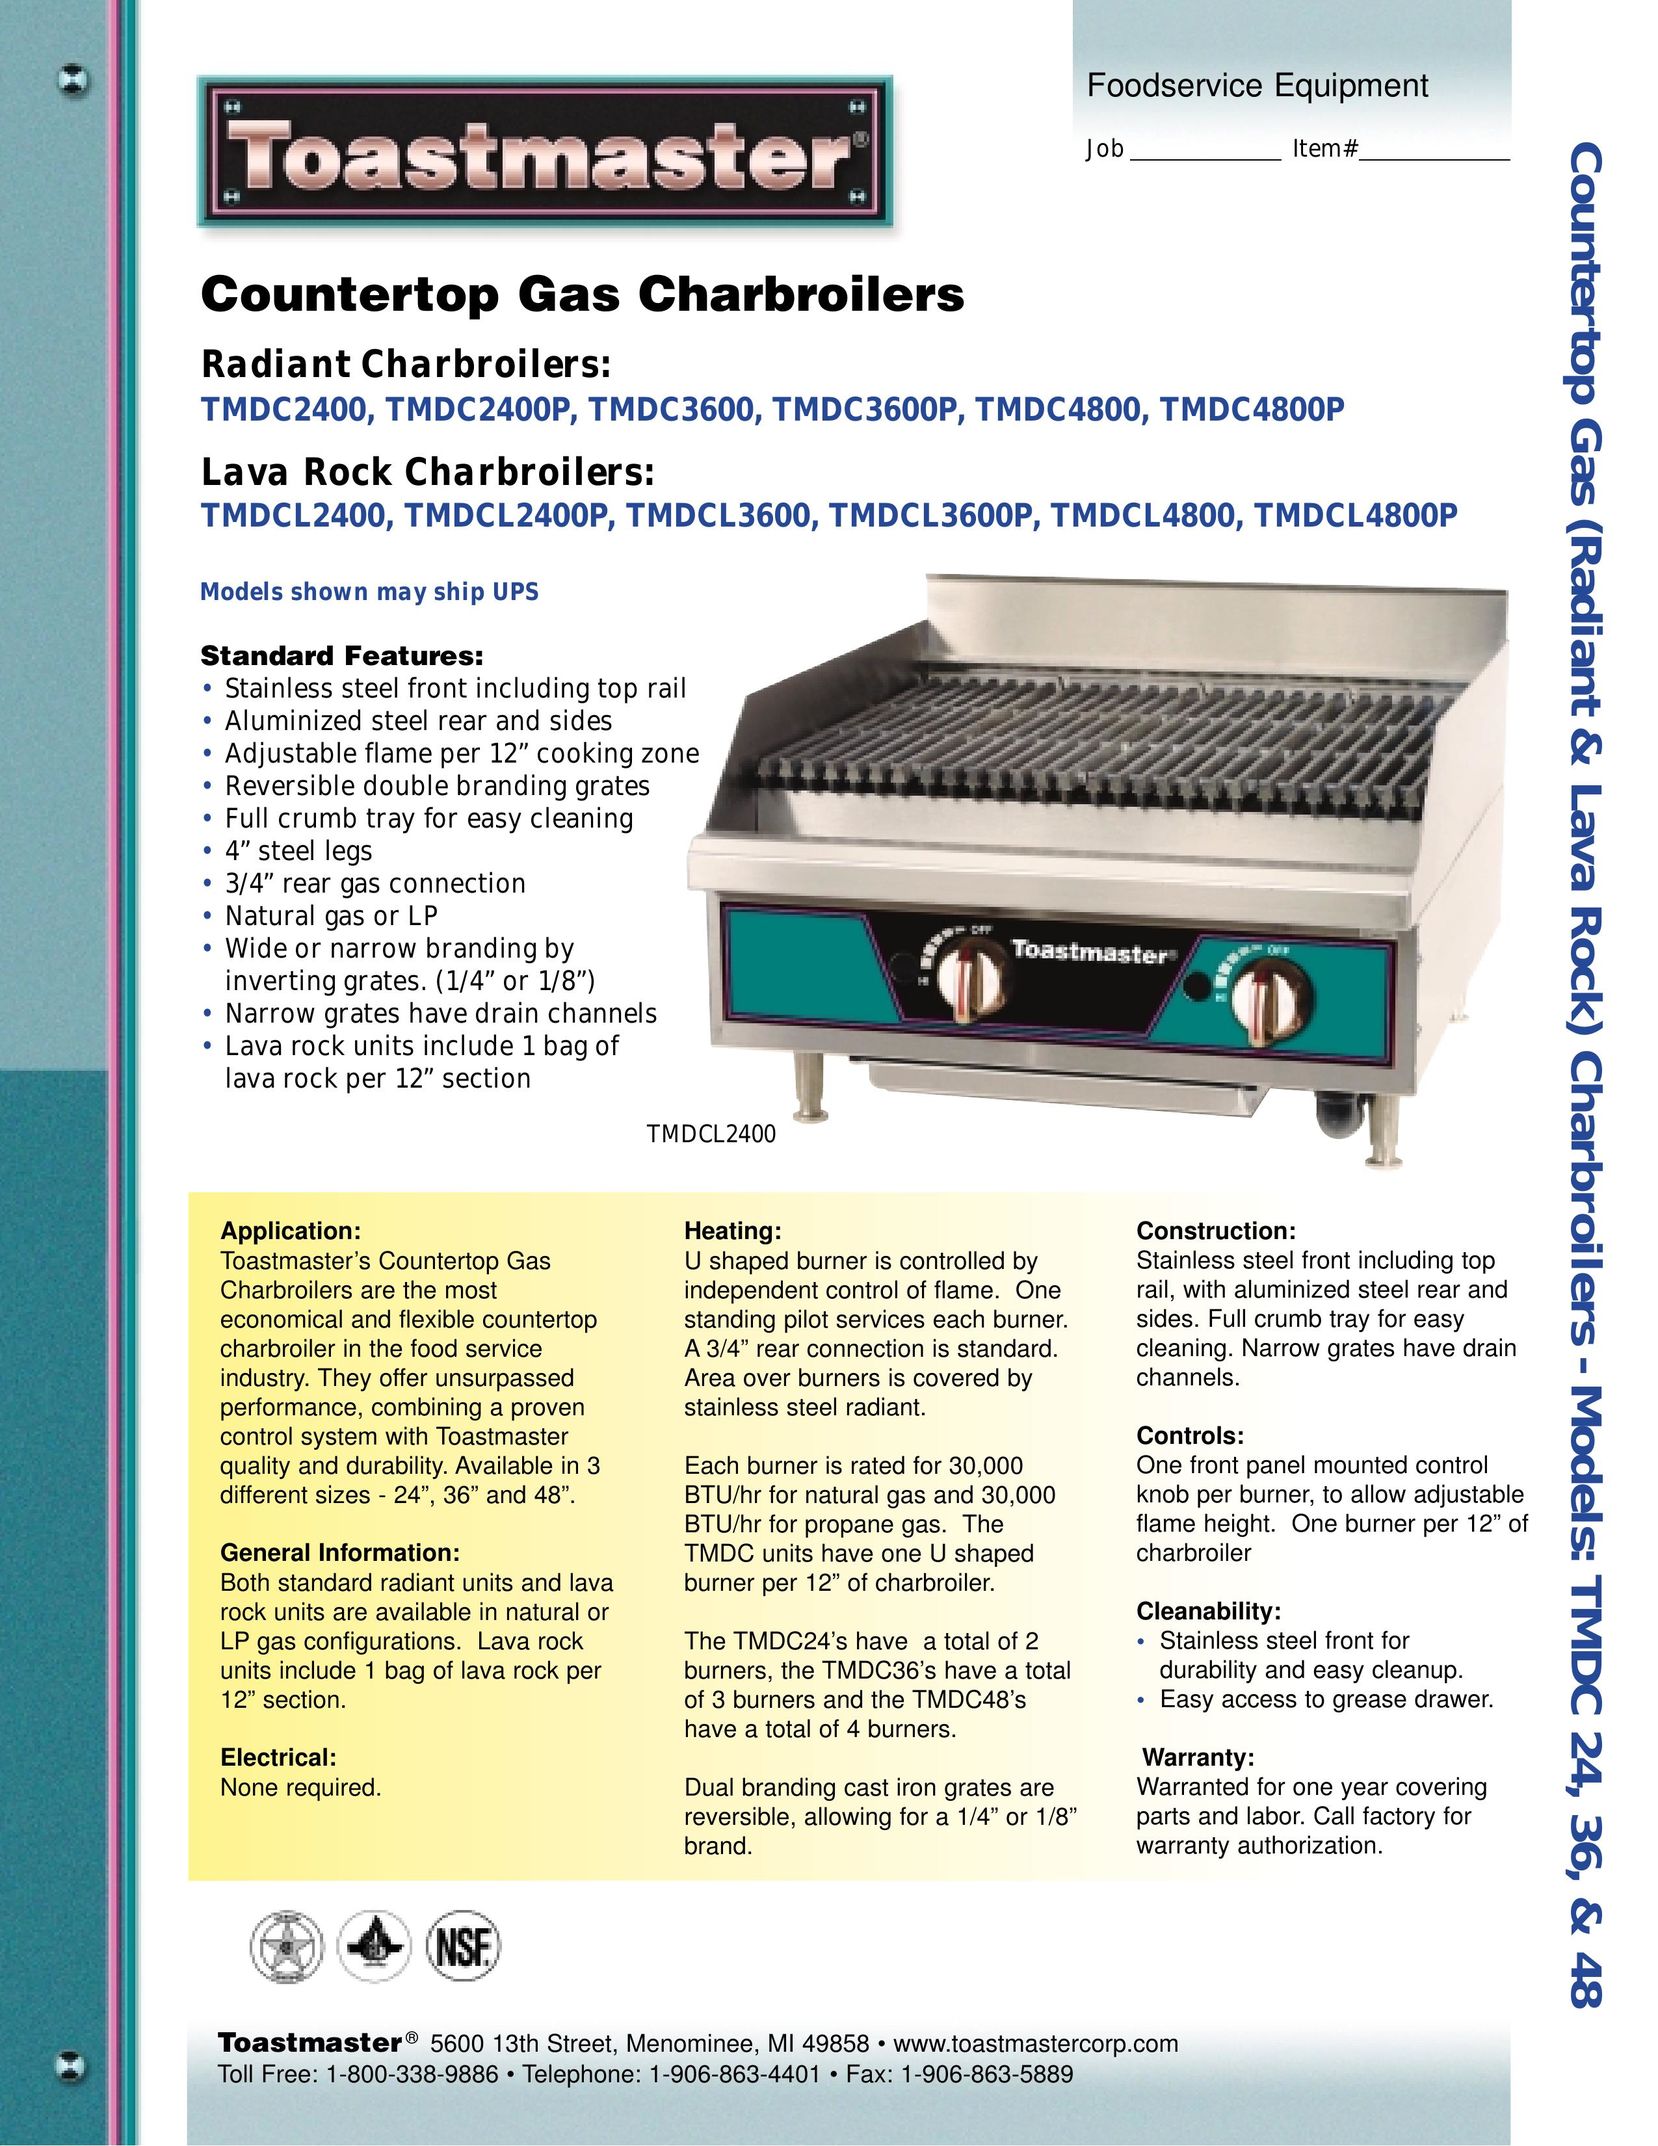 Toastmaster TMDC3600 Oven User Manual